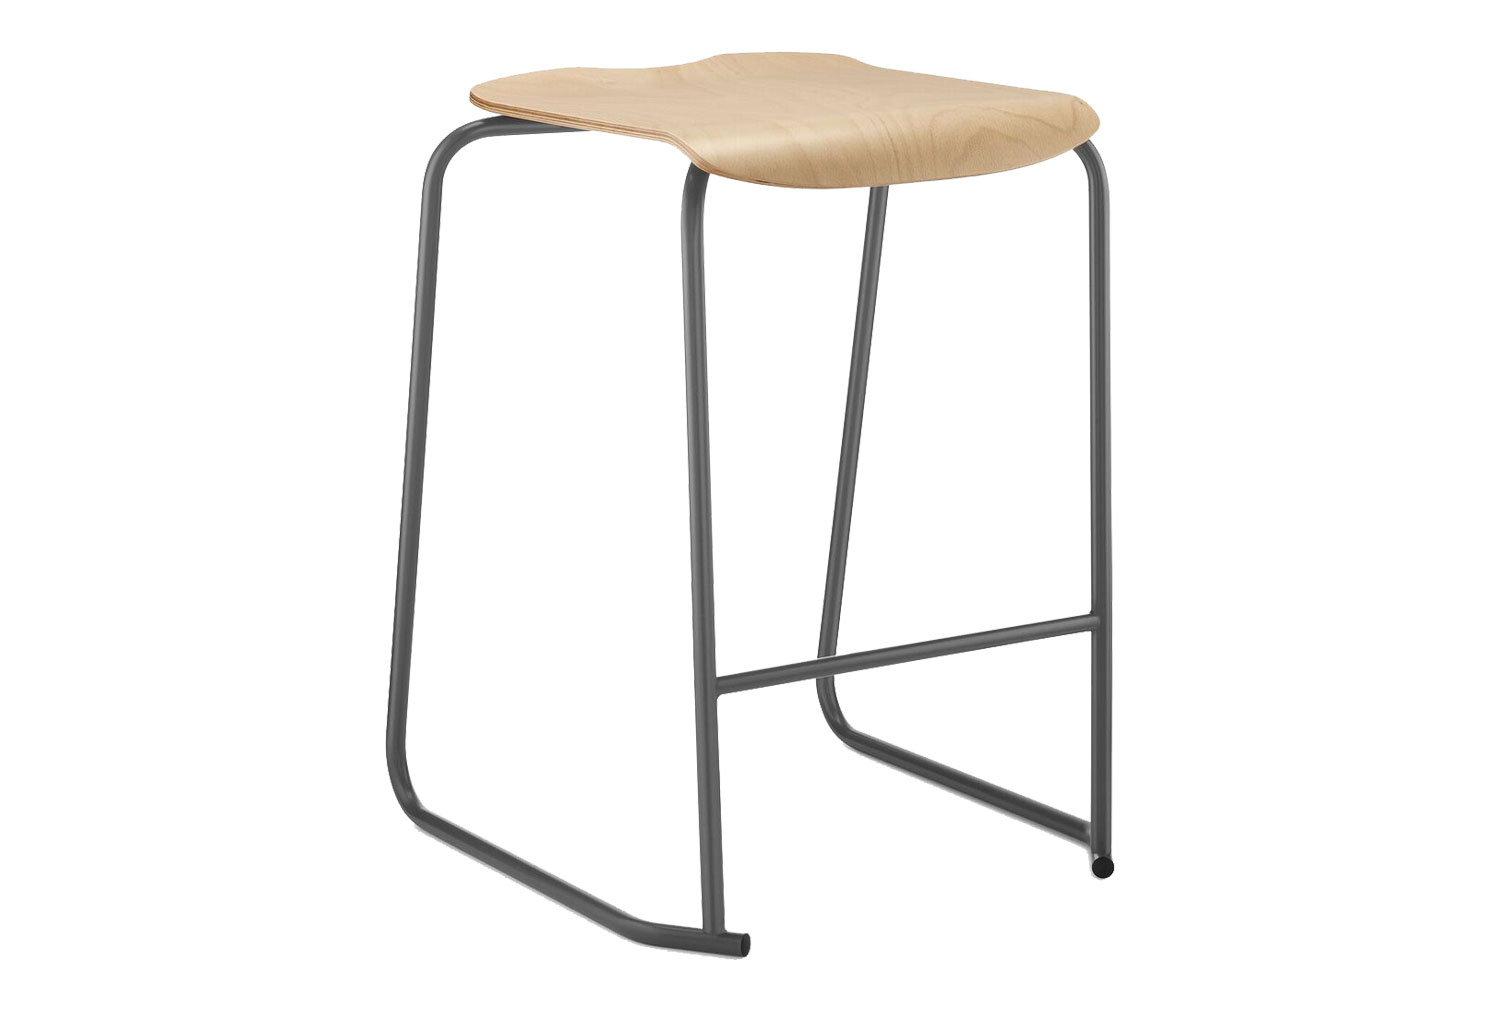 Hille SE Classroom Stool With Wooden Seat